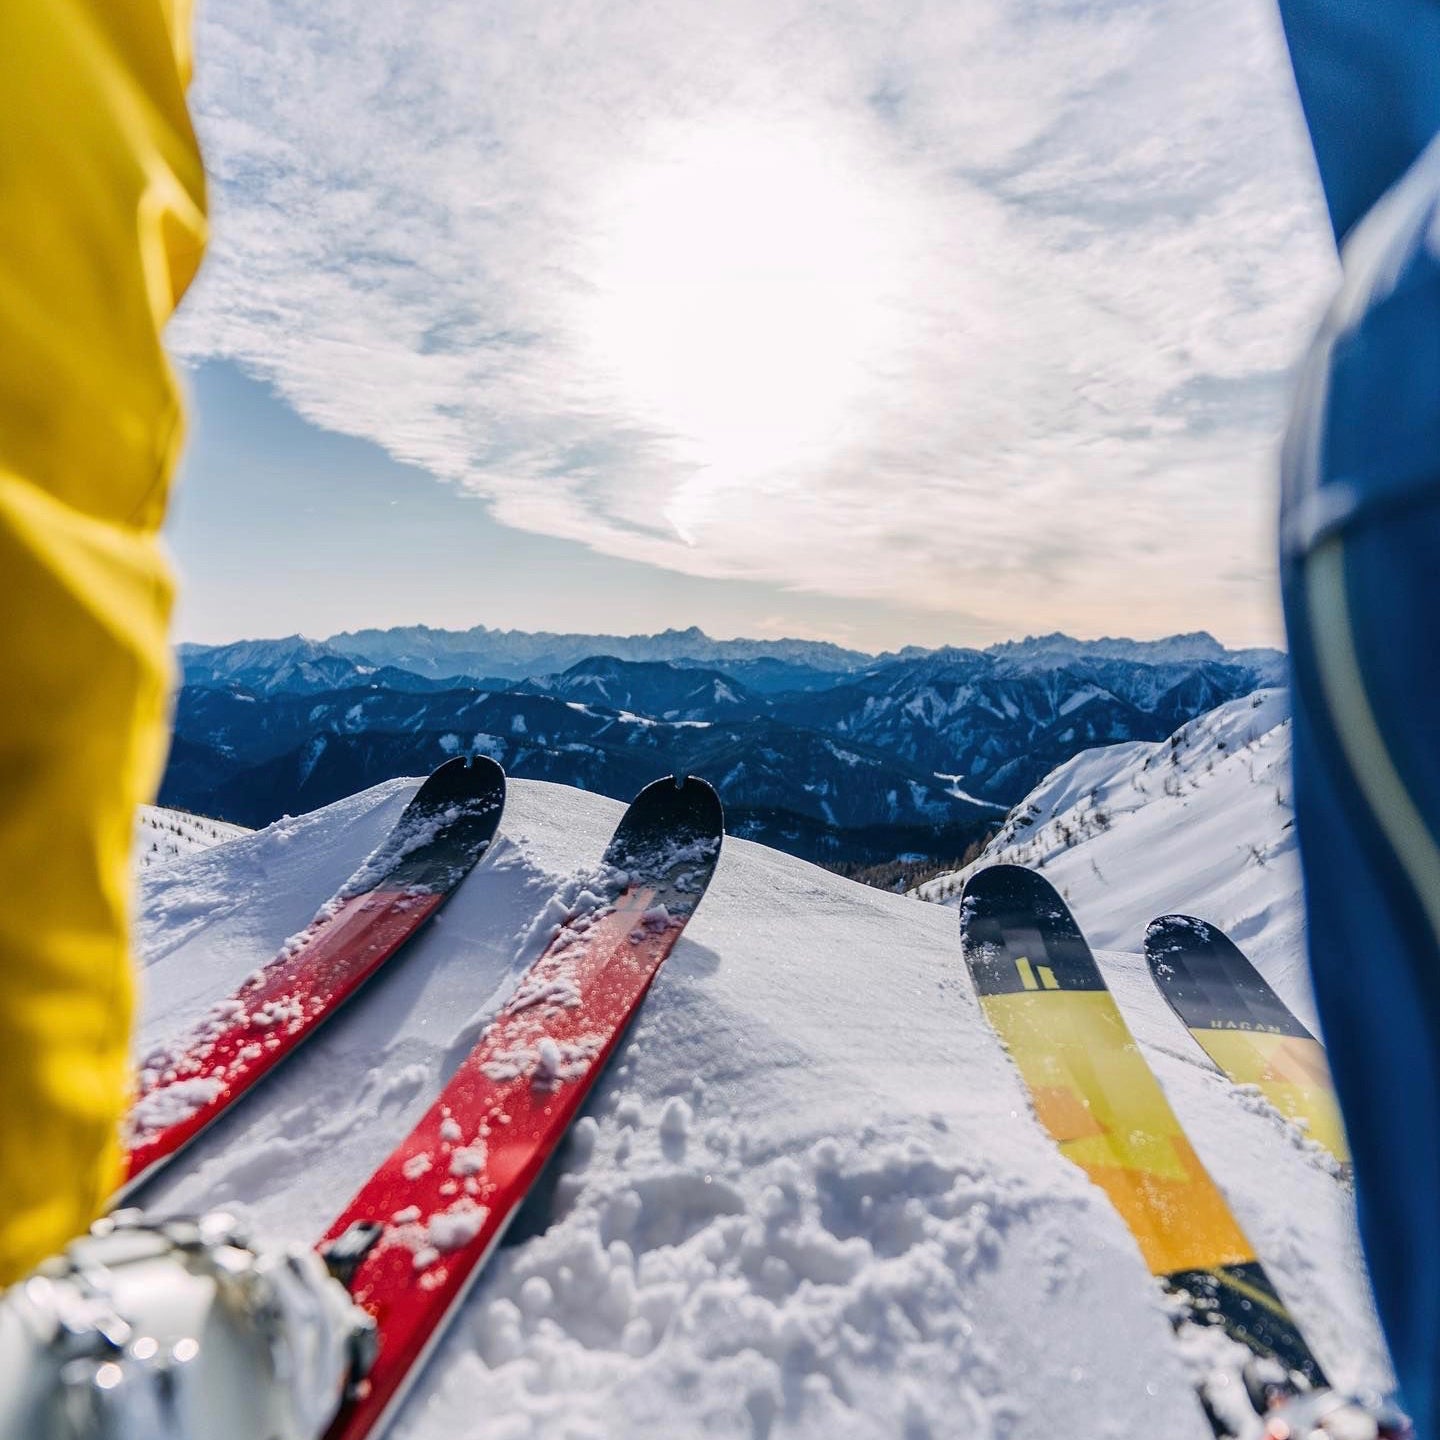 A pair of skis backdropped by snowy mountaintops. 